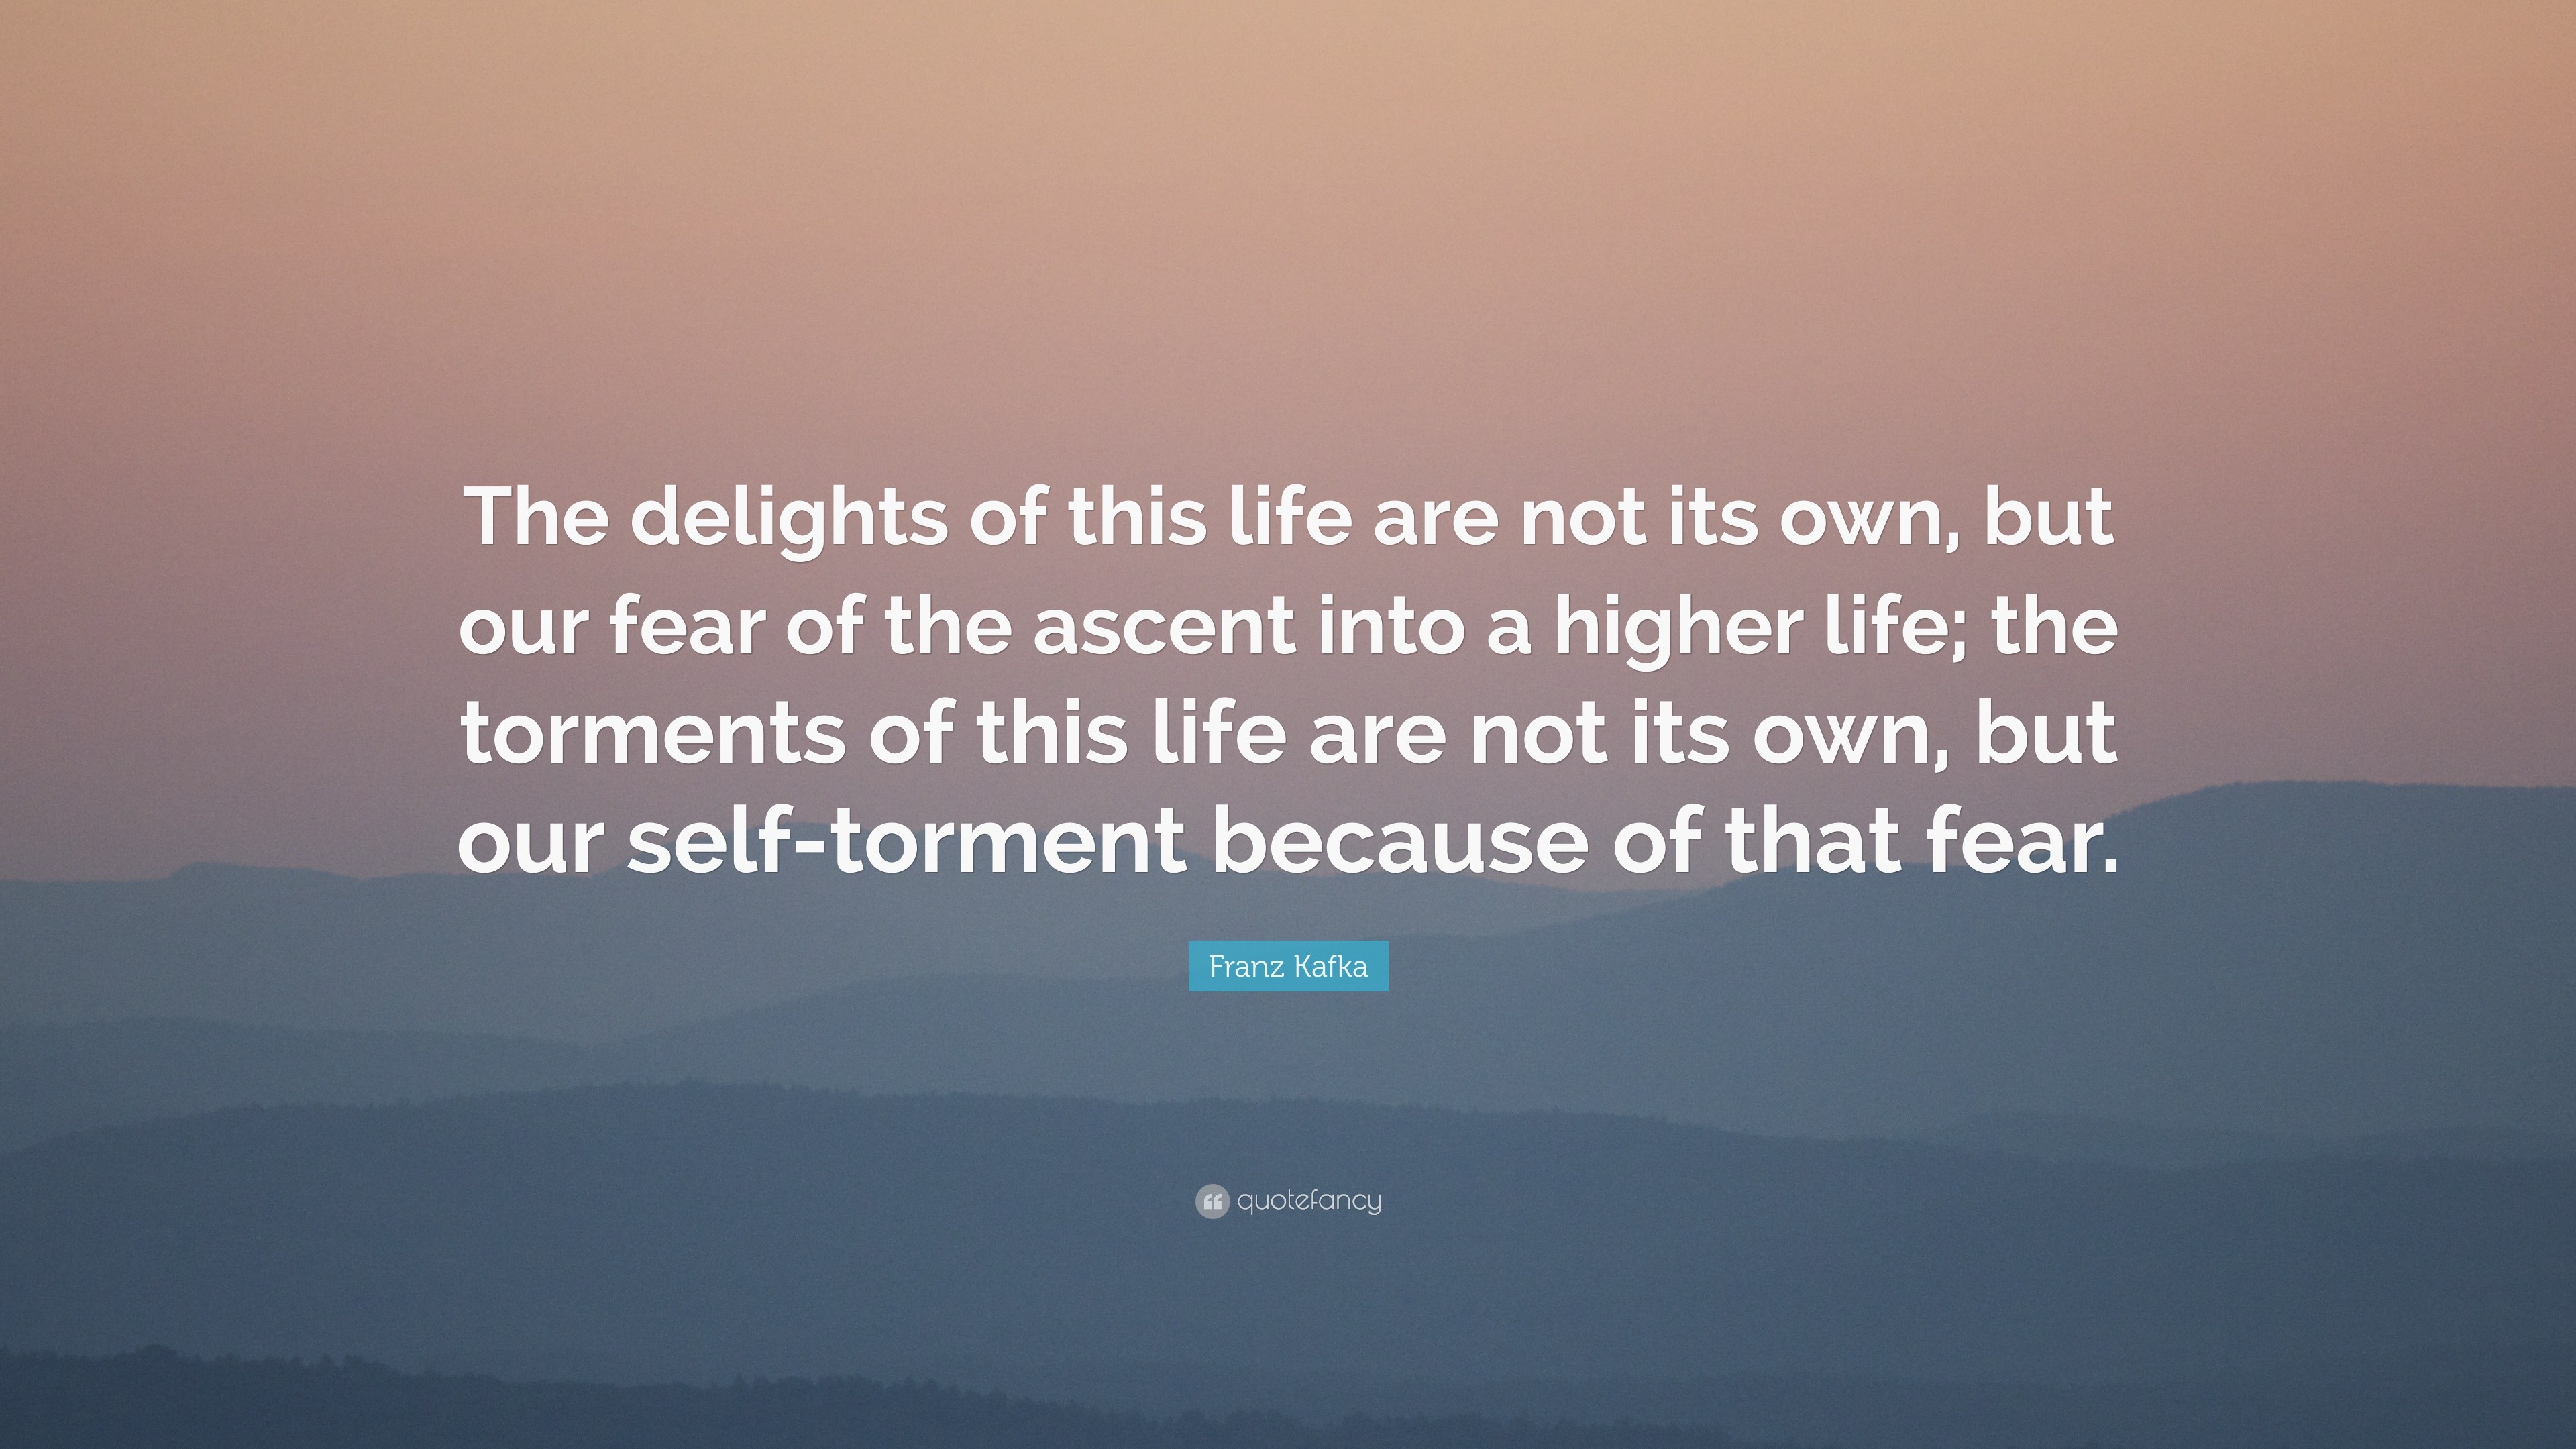 Franz Kafka Quote: “The delights of this life are not its own, but our ...